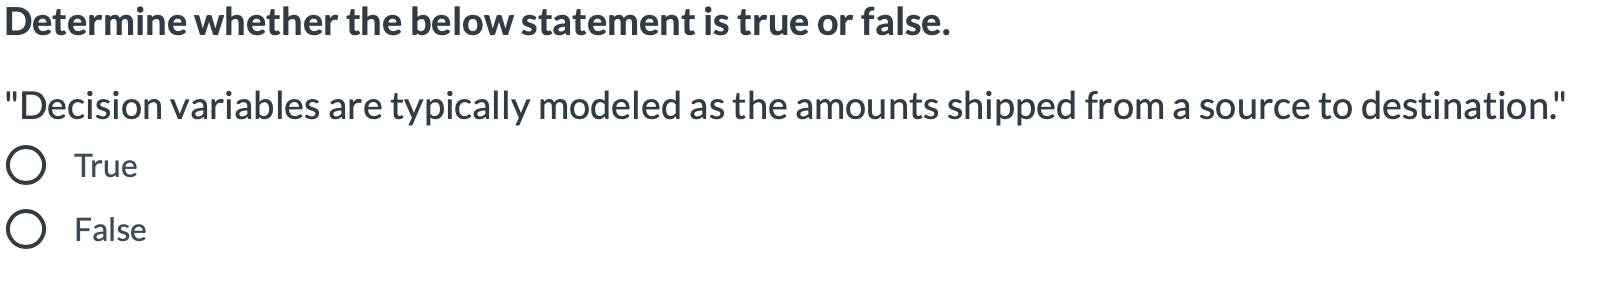 Determine whether the below statement is true or false. 